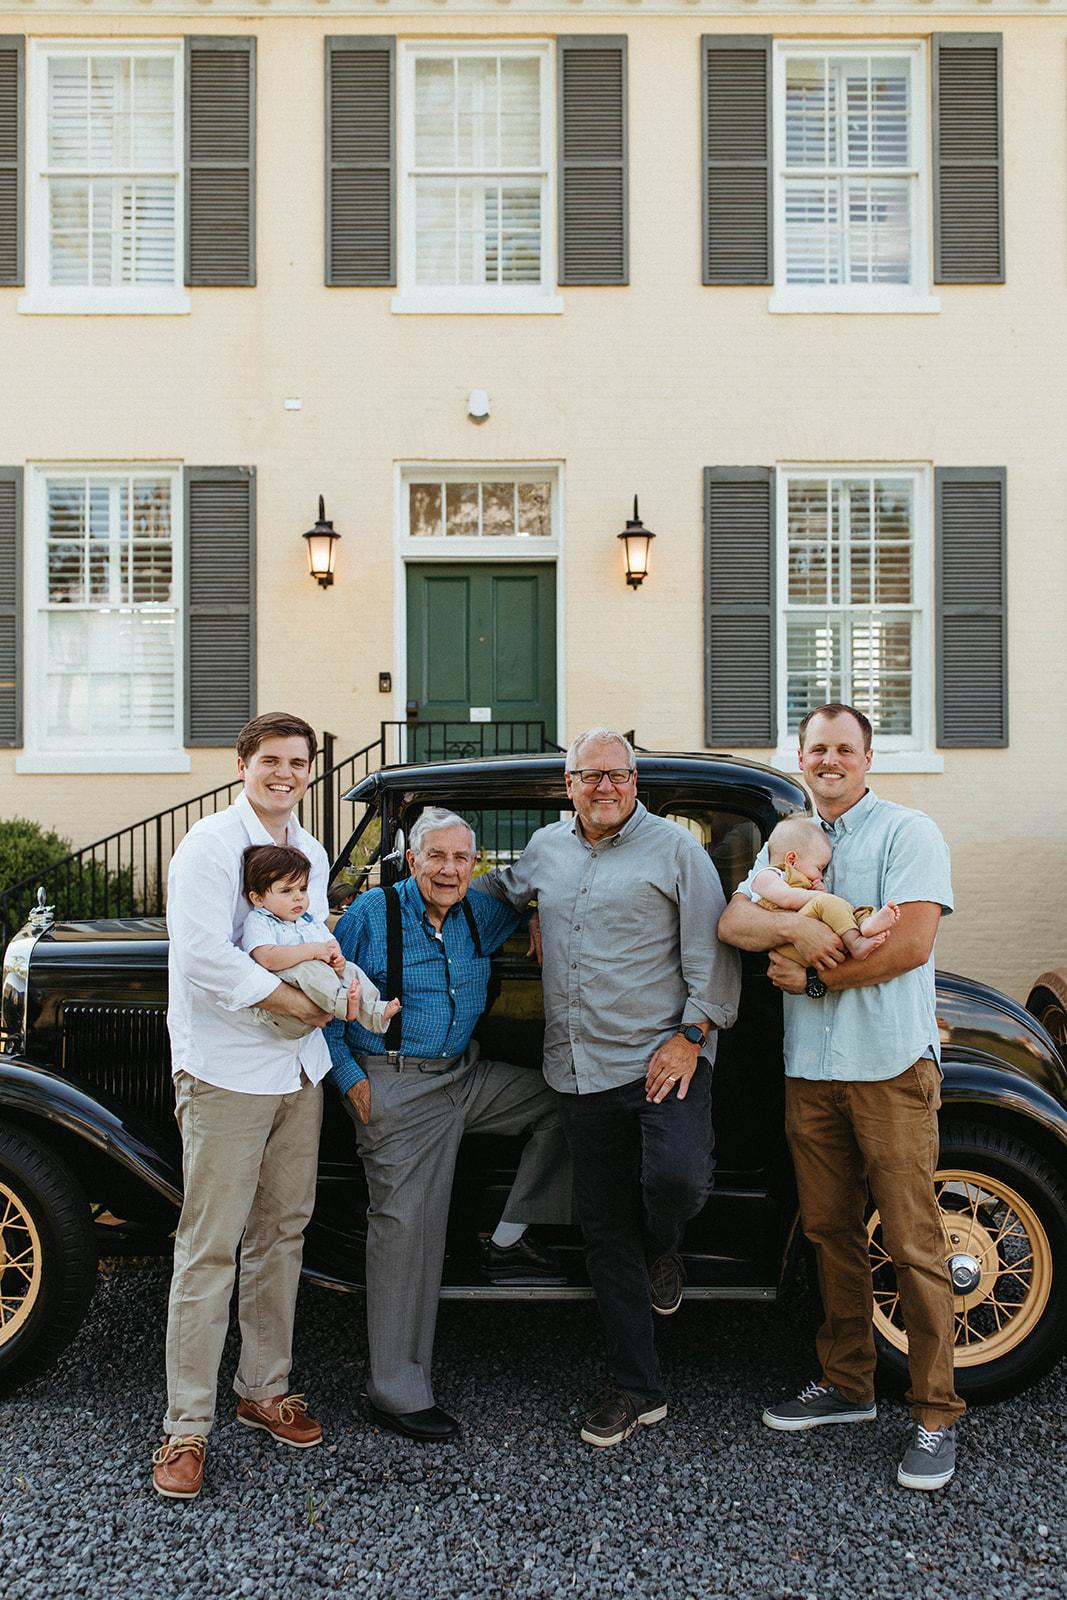 Four generations of the Wigfields. (Courtesy of Gregory Earl Wigfield)